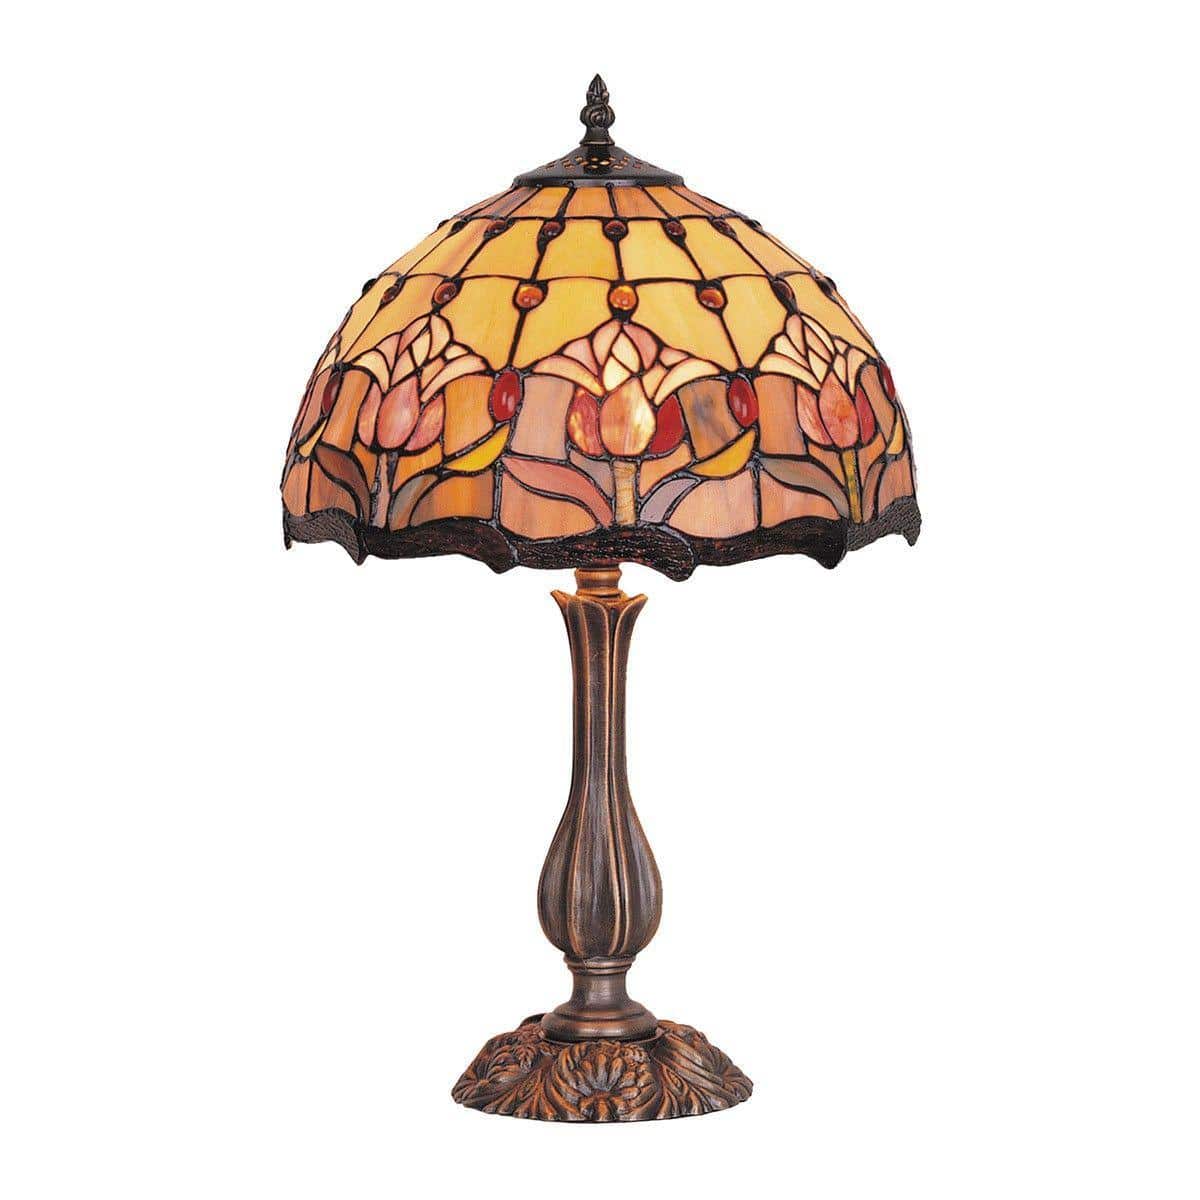 Tiffany Table Lamps Bronze Red Tulip Tiffany Small Table Lamp 240V stunning design TBL1235RDC6